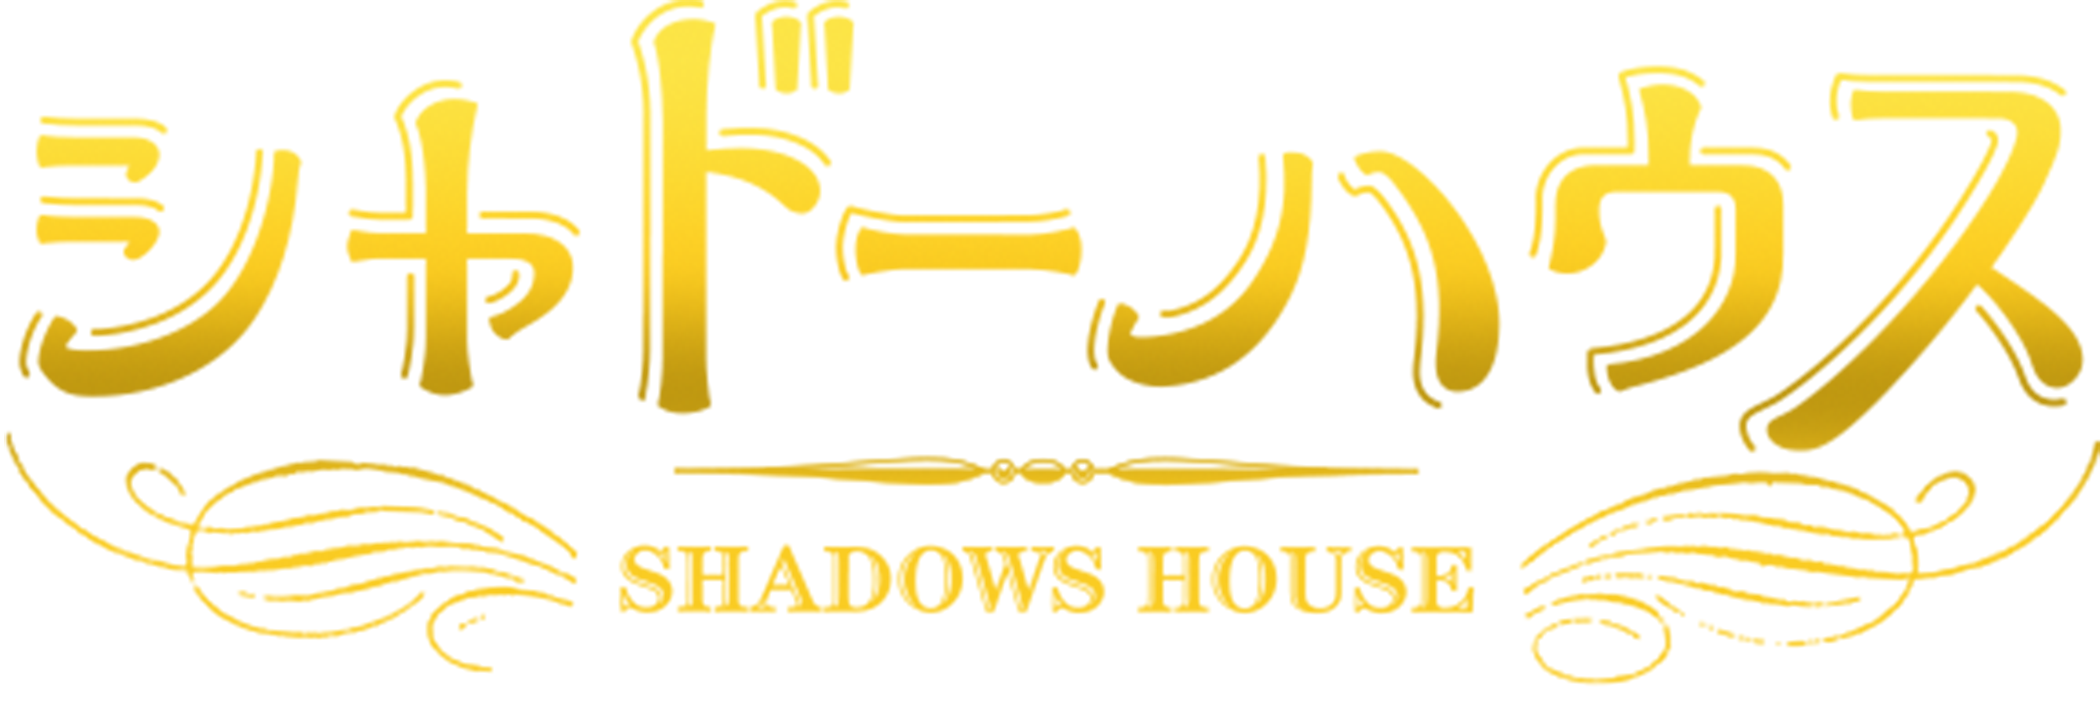 List of Shadows House episodes - Wikipedia